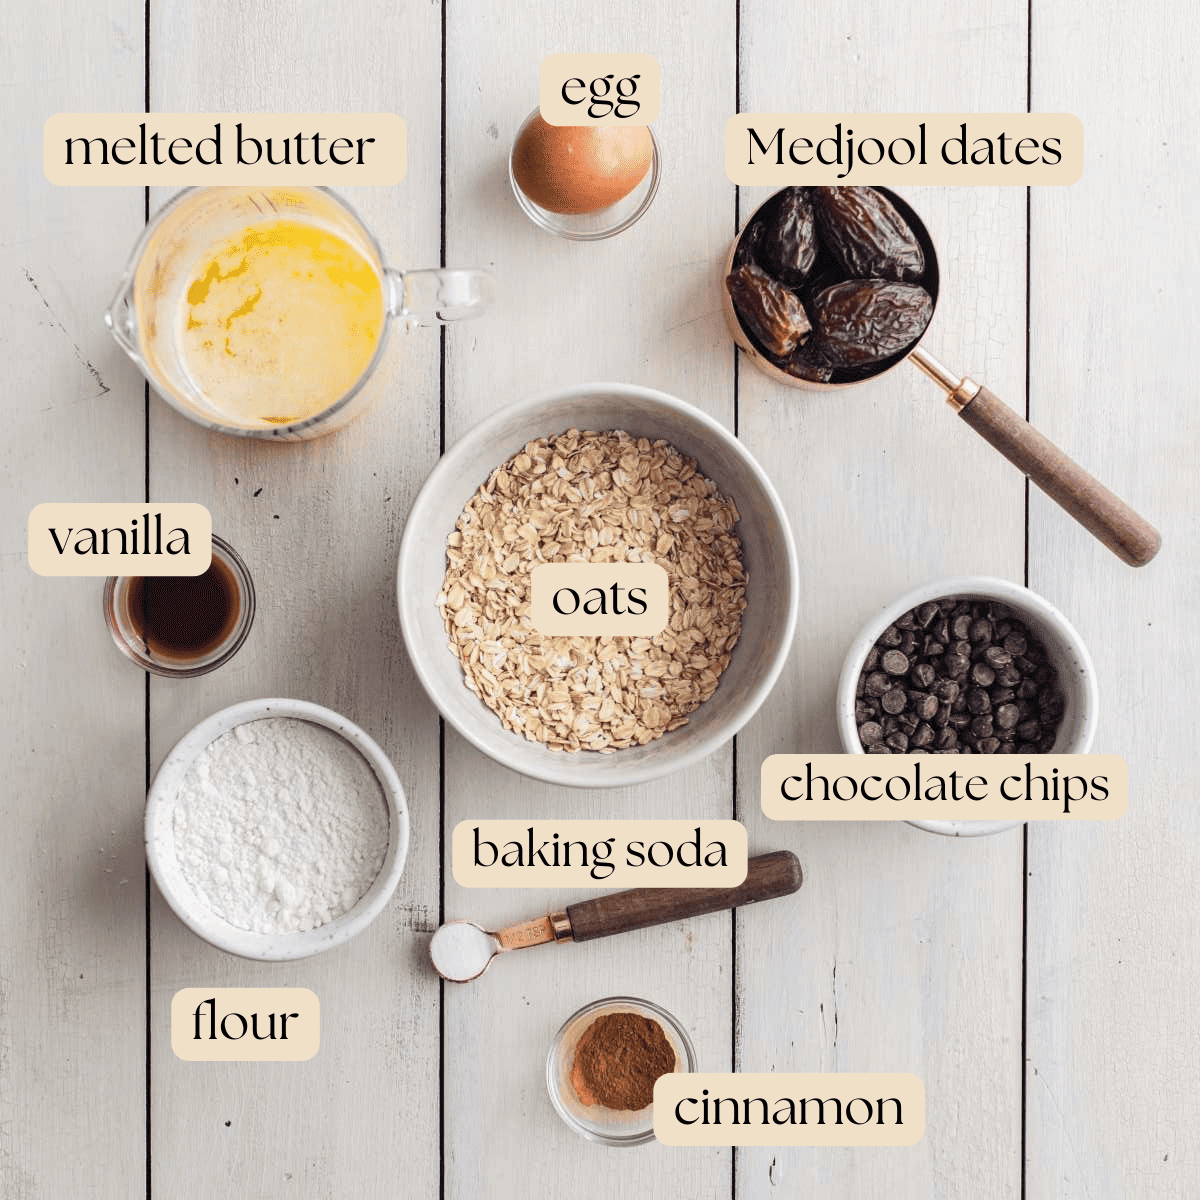 All ingredients to make date sweetened chocolate chip cookies in mixing bowls, pinch bowls and measuring cups on a wooden table.